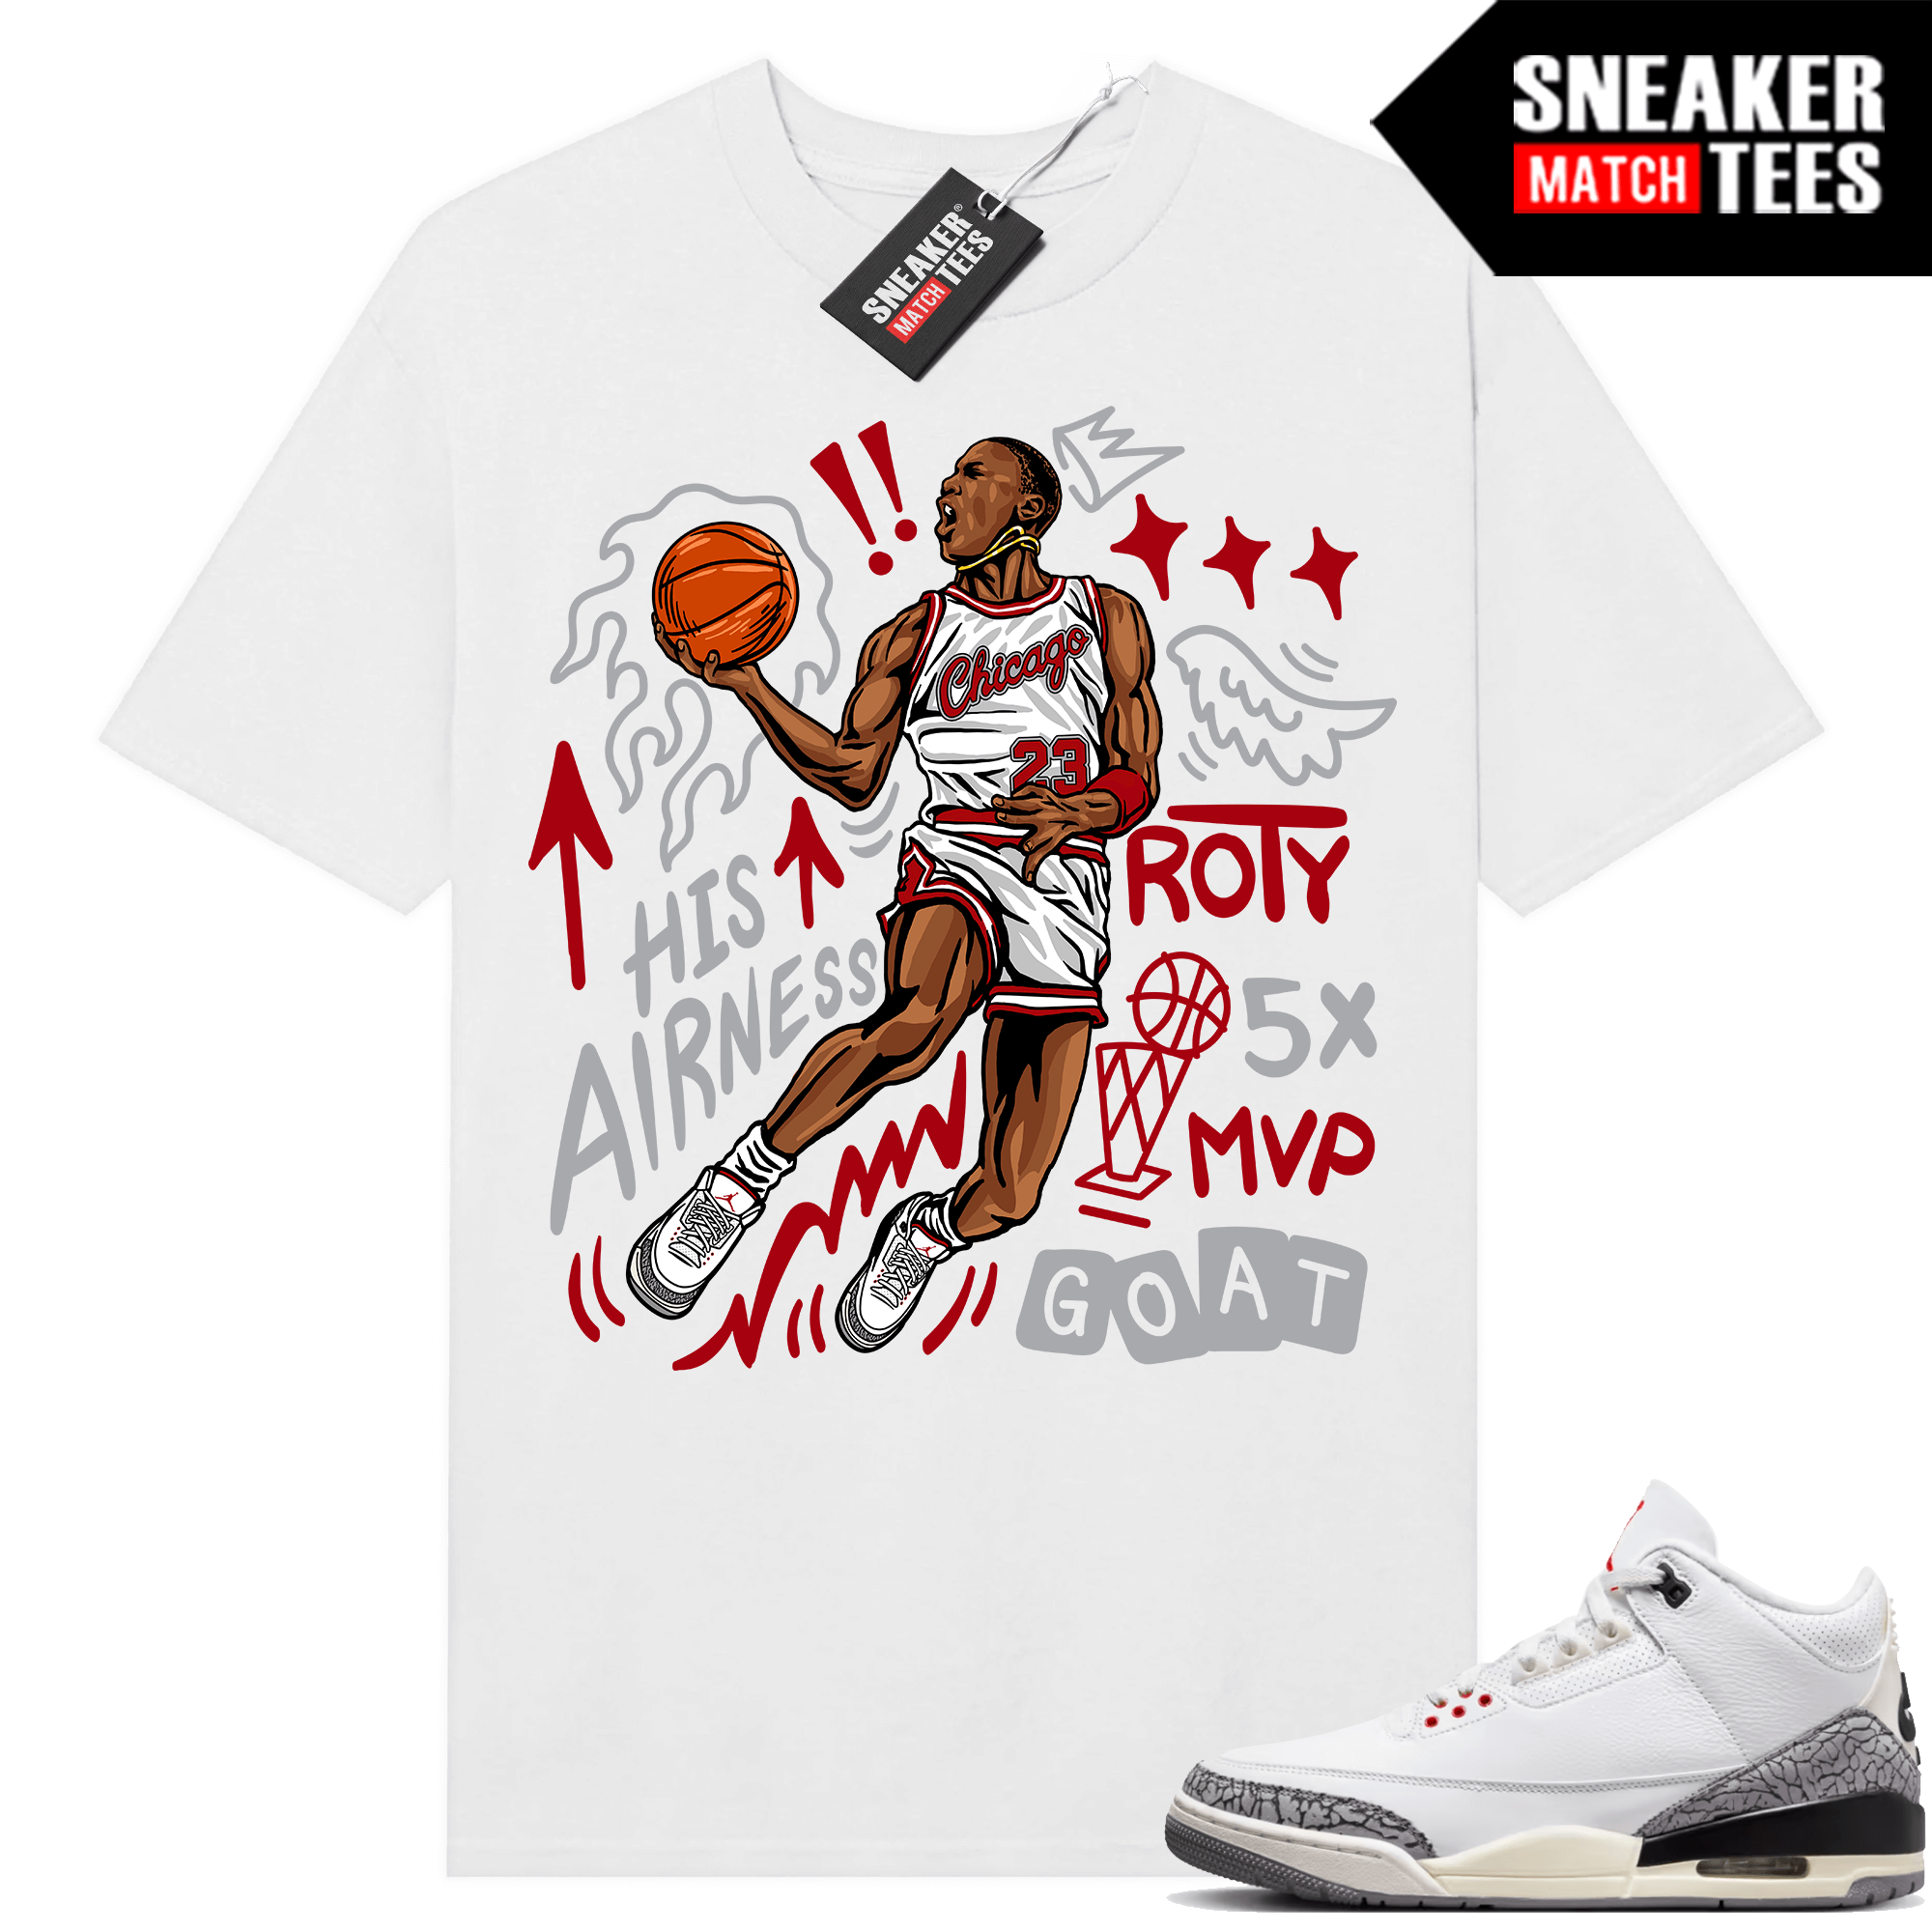 preview air jordan 1 chicago reimagined Reimagined Sneaker Tees Match White MJ His Airness